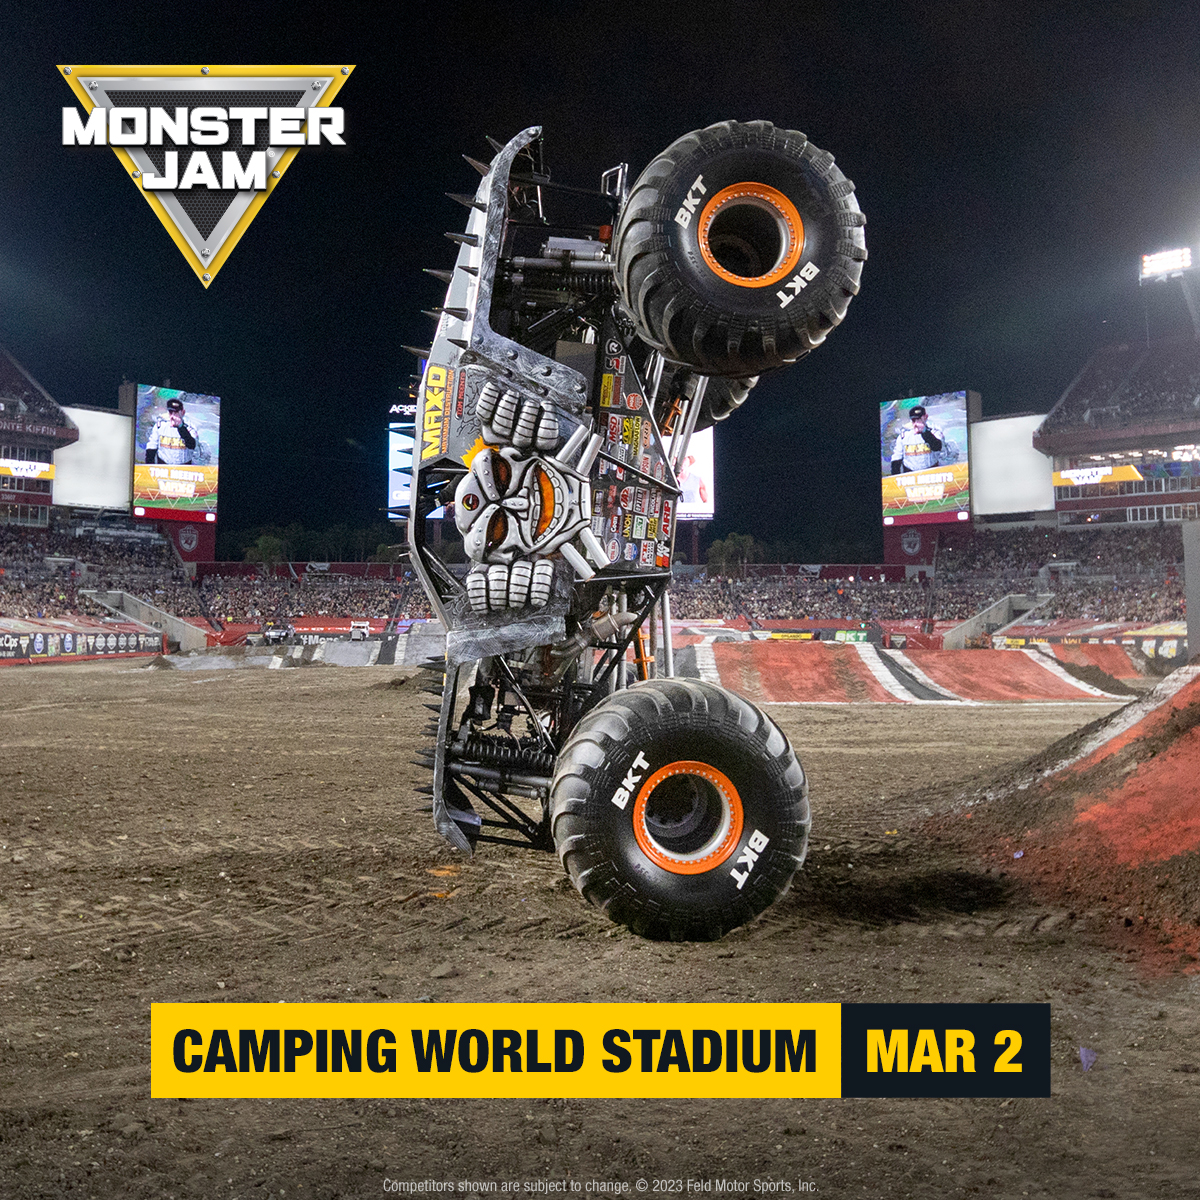 Monster Jam Orlando March 2 Family-friendly events